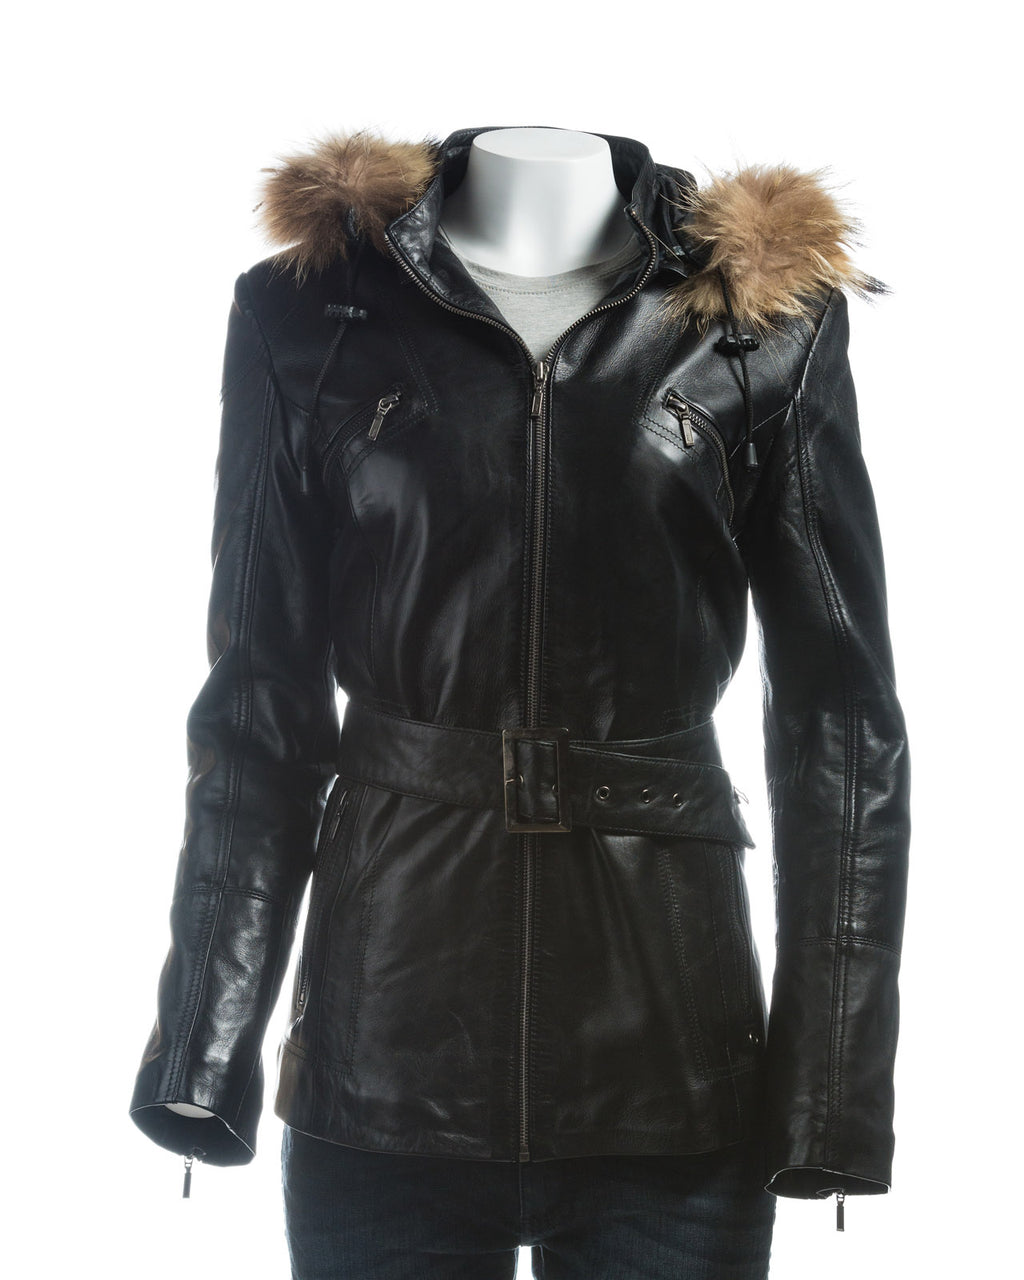 Ladies Black Belted Leather Coat With Detachable Fur Trimmed Hood: Paola